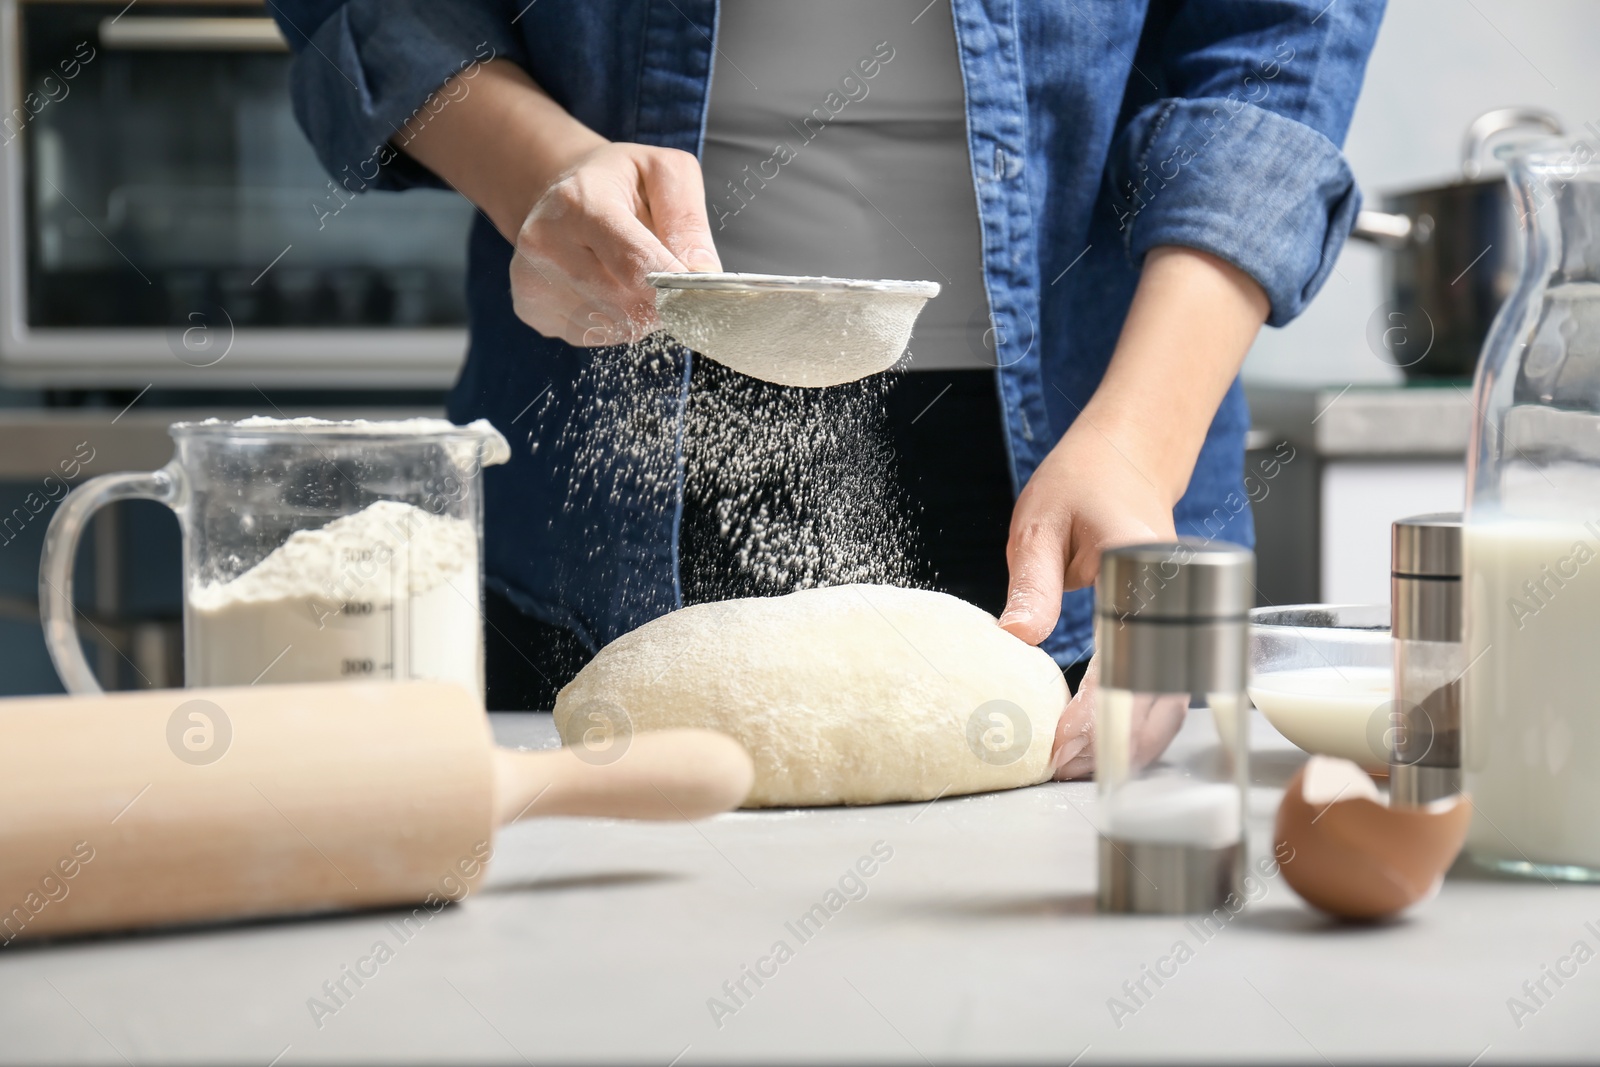 Photo of Woman sprinkling flour over dough on table in kitchen